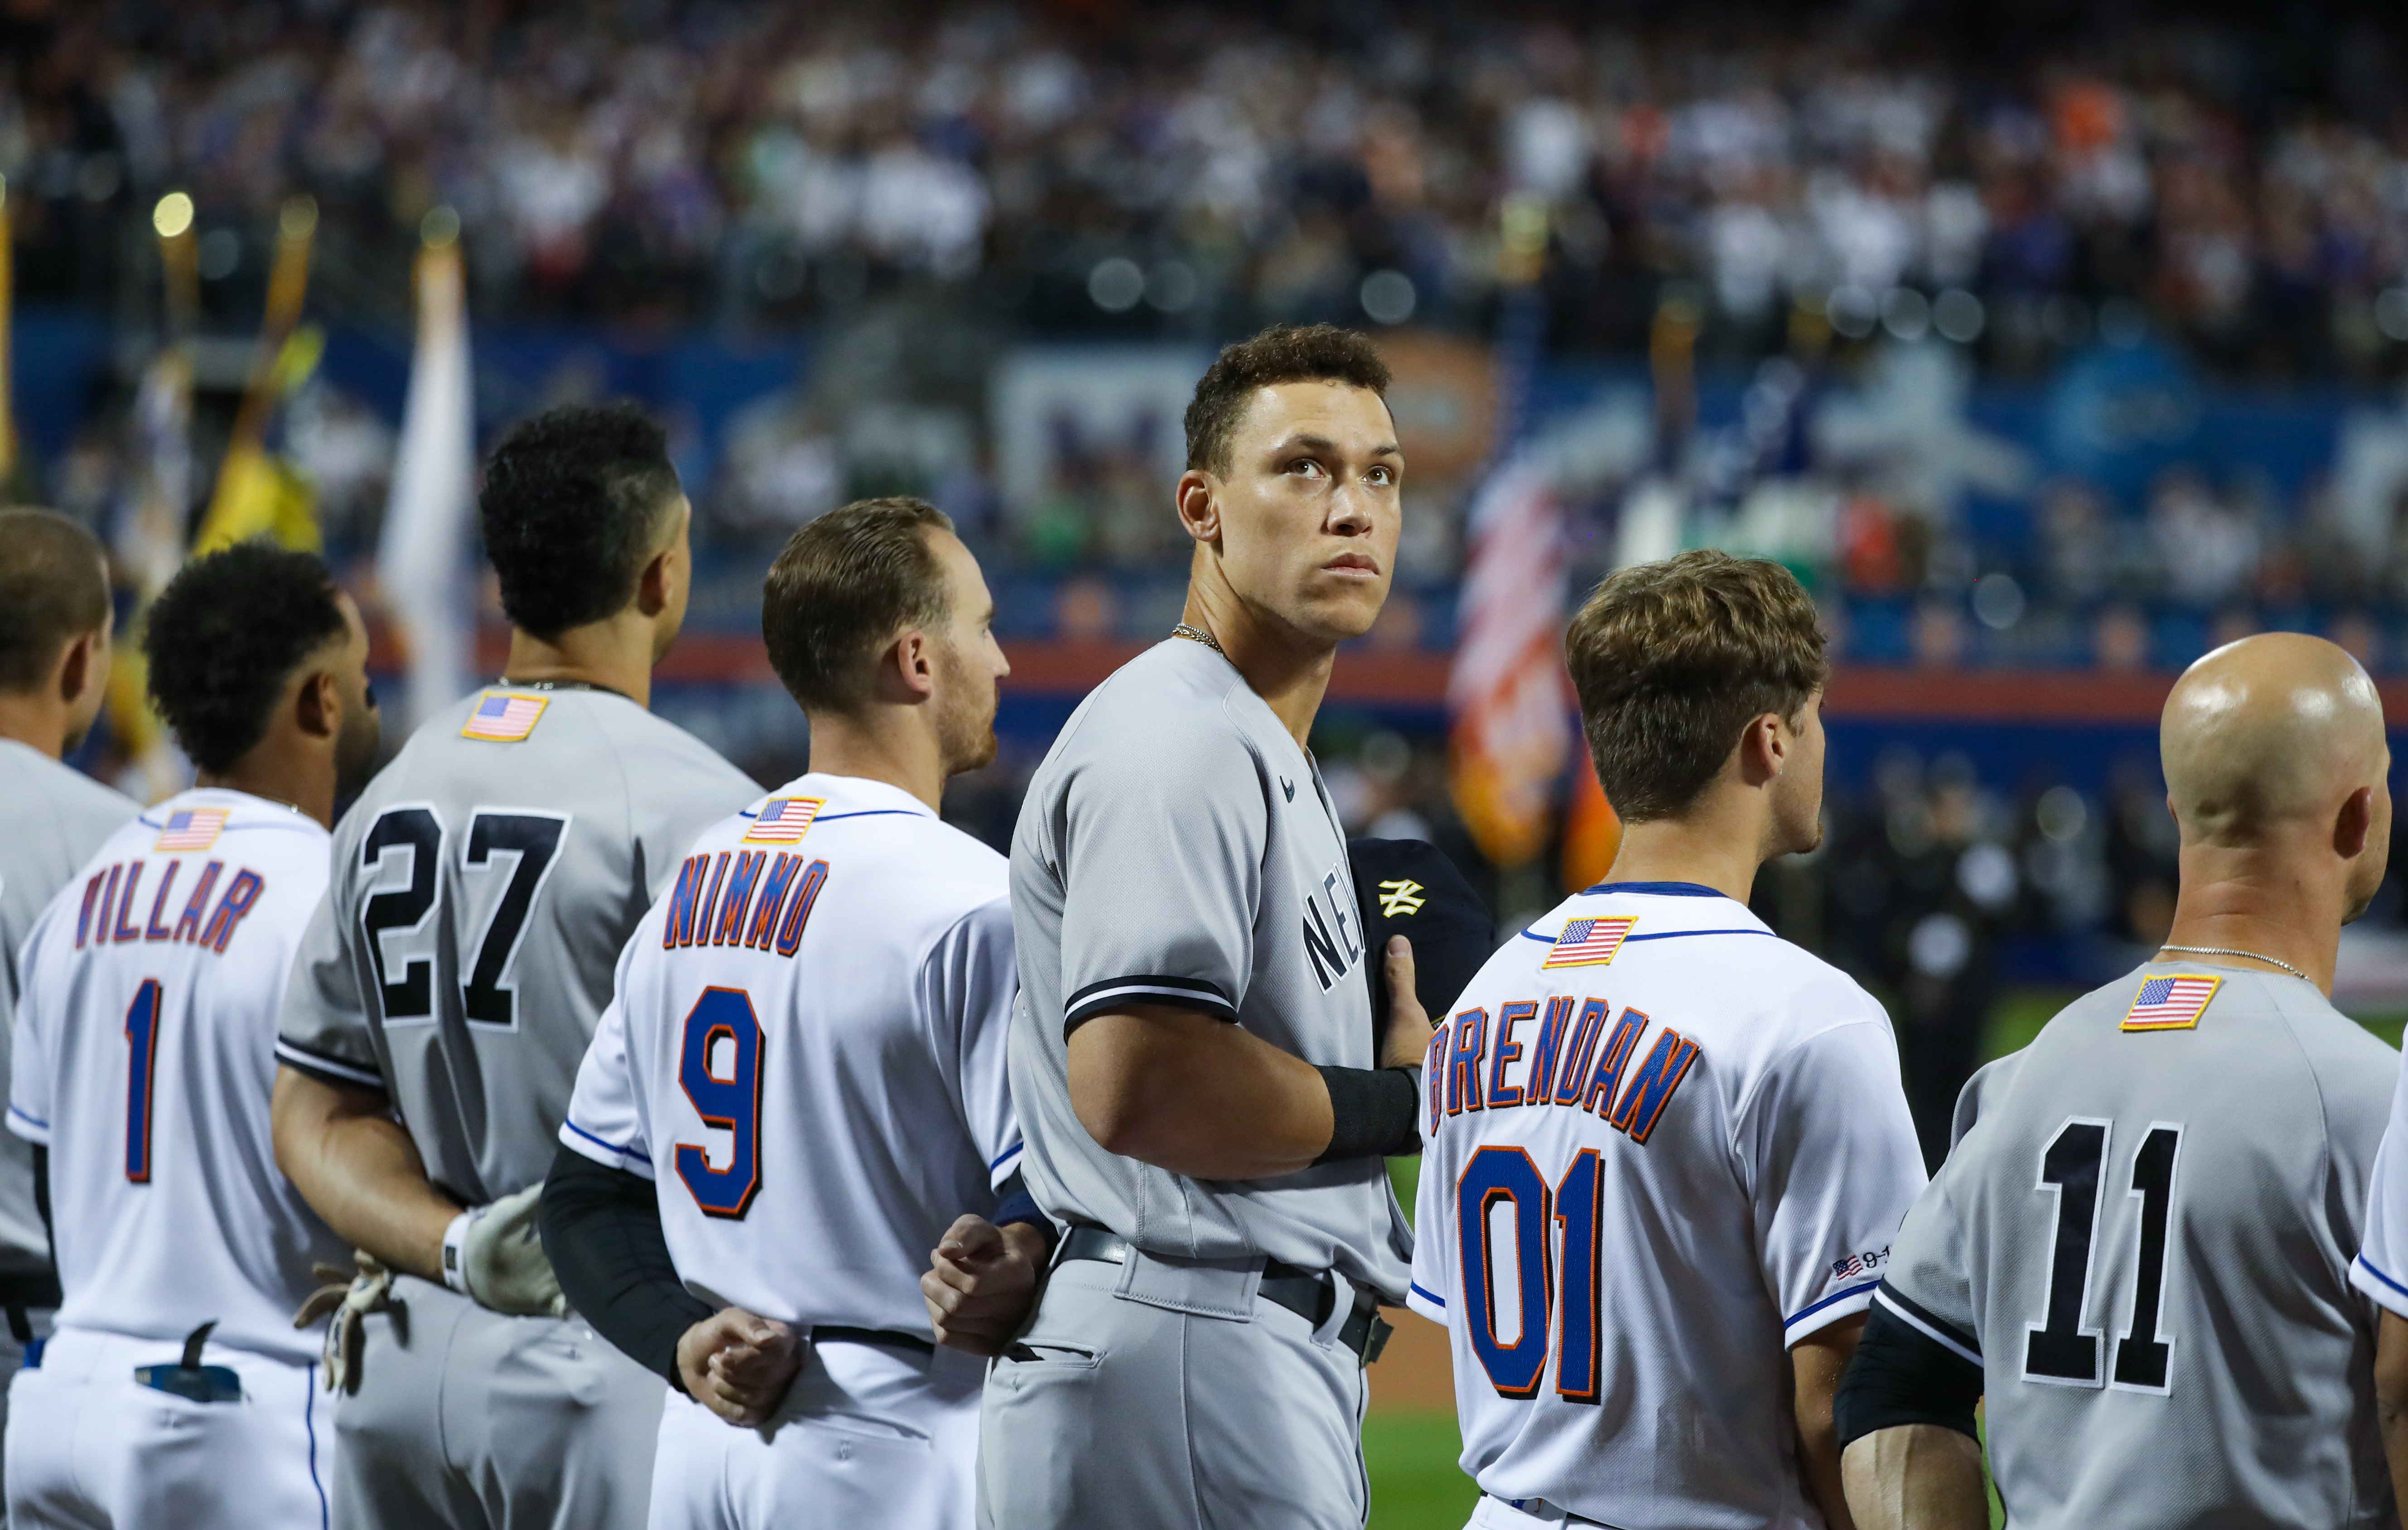 NY Mets lose to Yankees in heartbreaking fashion on 20th anniversary of 9/11